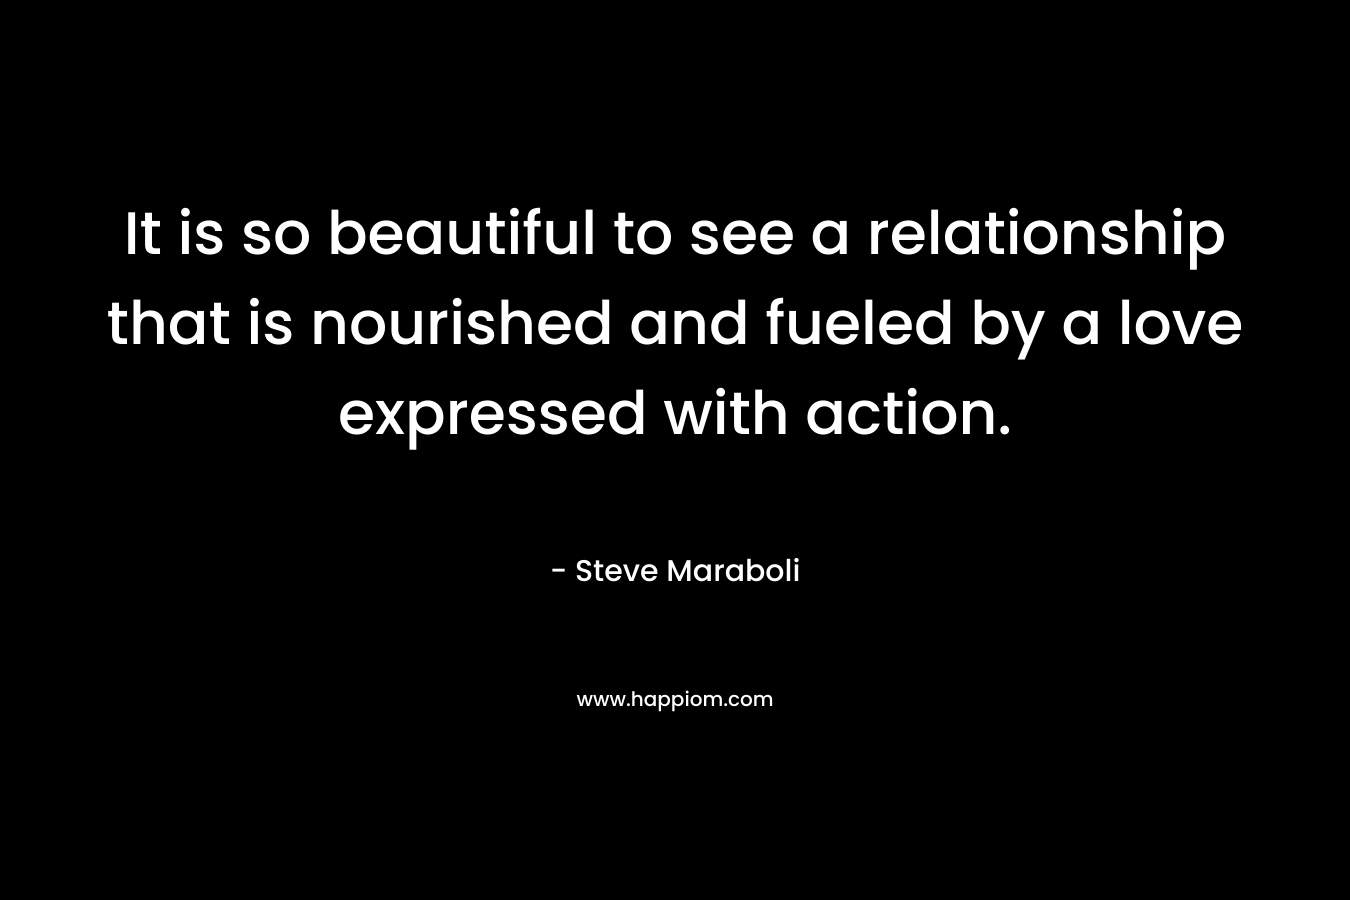 It is so beautiful to see a relationship that is nourished and fueled by a love expressed with action. – Steve Maraboli